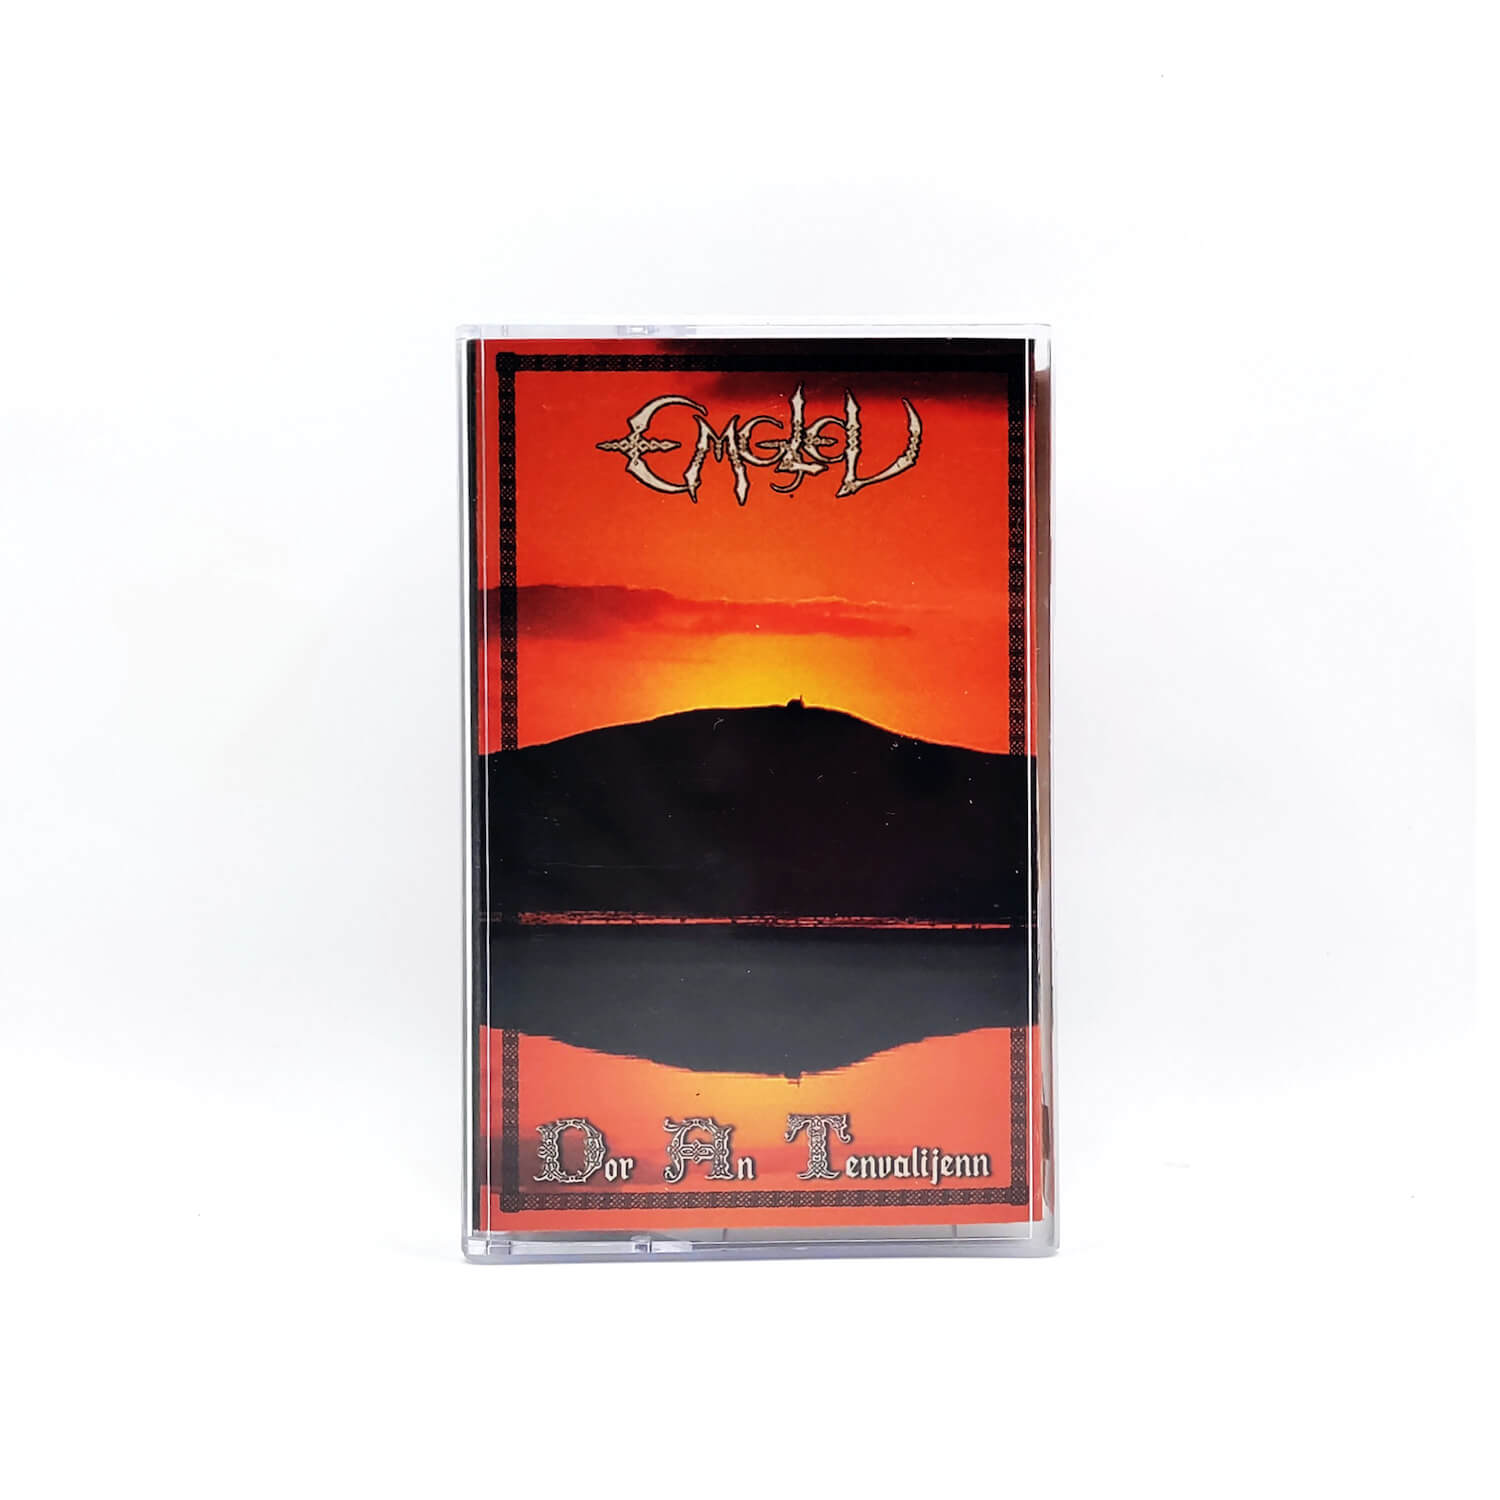 [SOLD OUT] EMGLEV "Dor An Tenvalijenn" cassette tape (1994-1996 dungeon synth, lim.100)